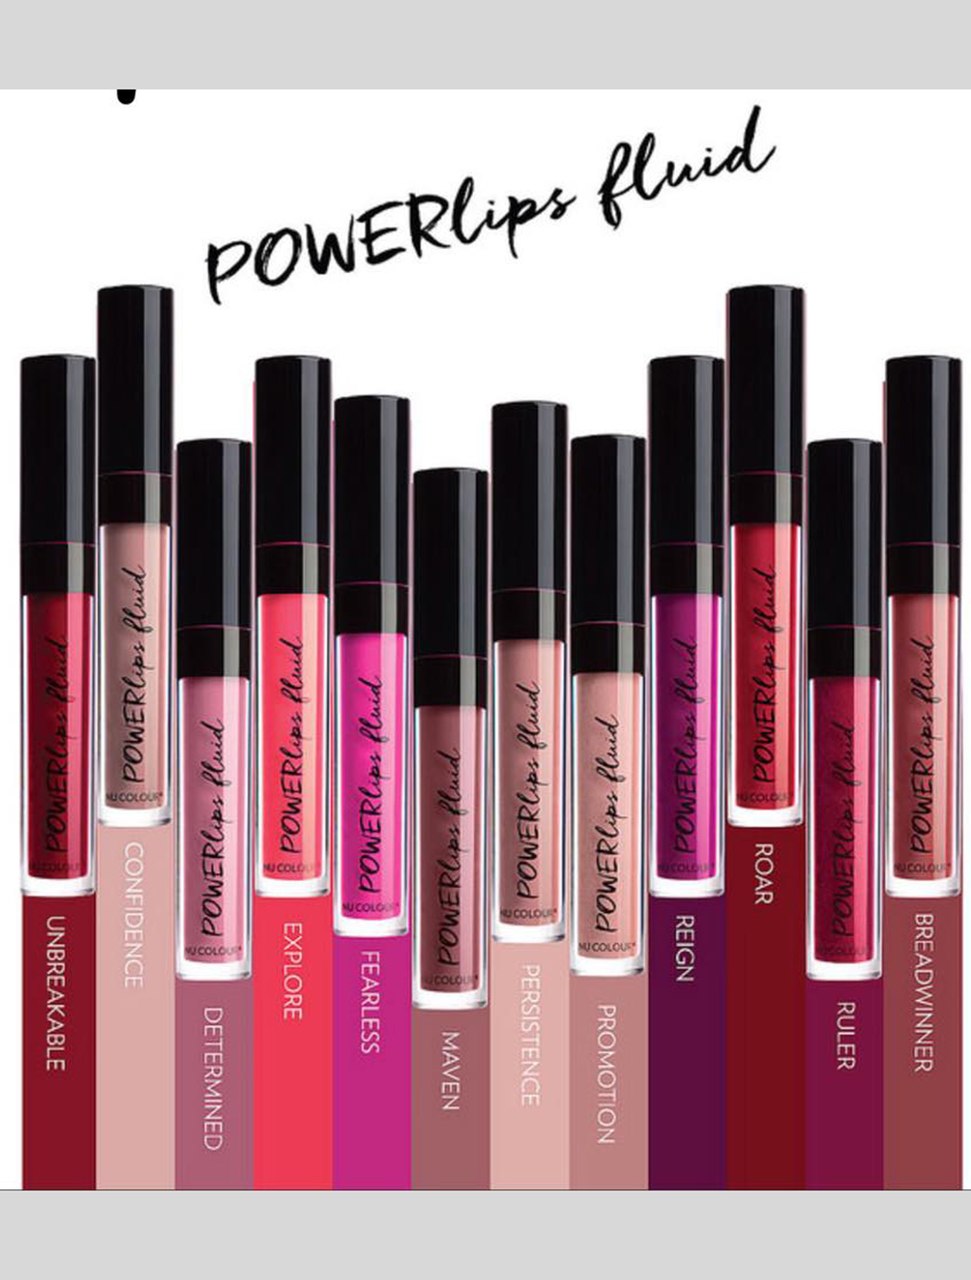 POWERLips Fluid - BEING DISCONTINUED**